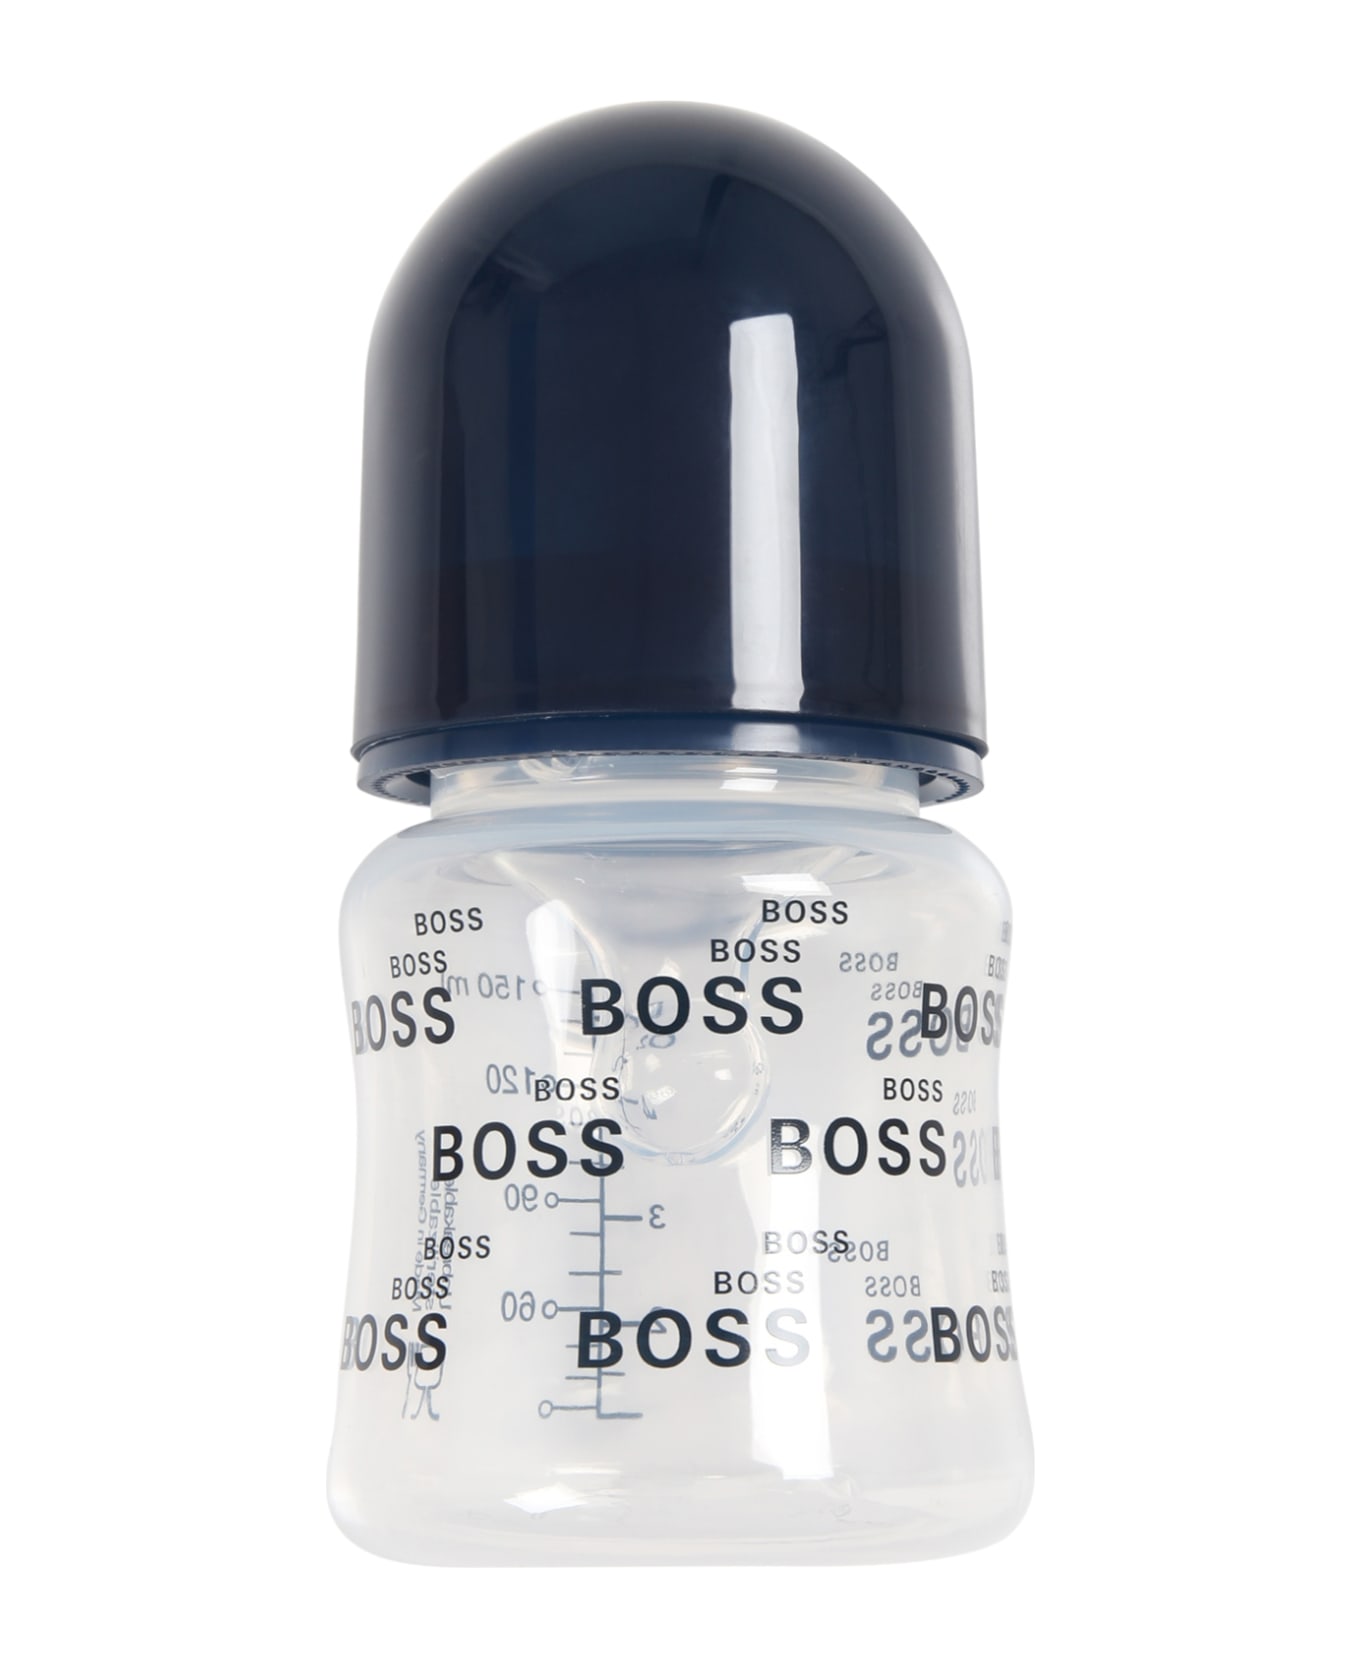 Hugo Boss Blue Set For Baby Boy With Logos - Blue アクセサリー＆ギフト